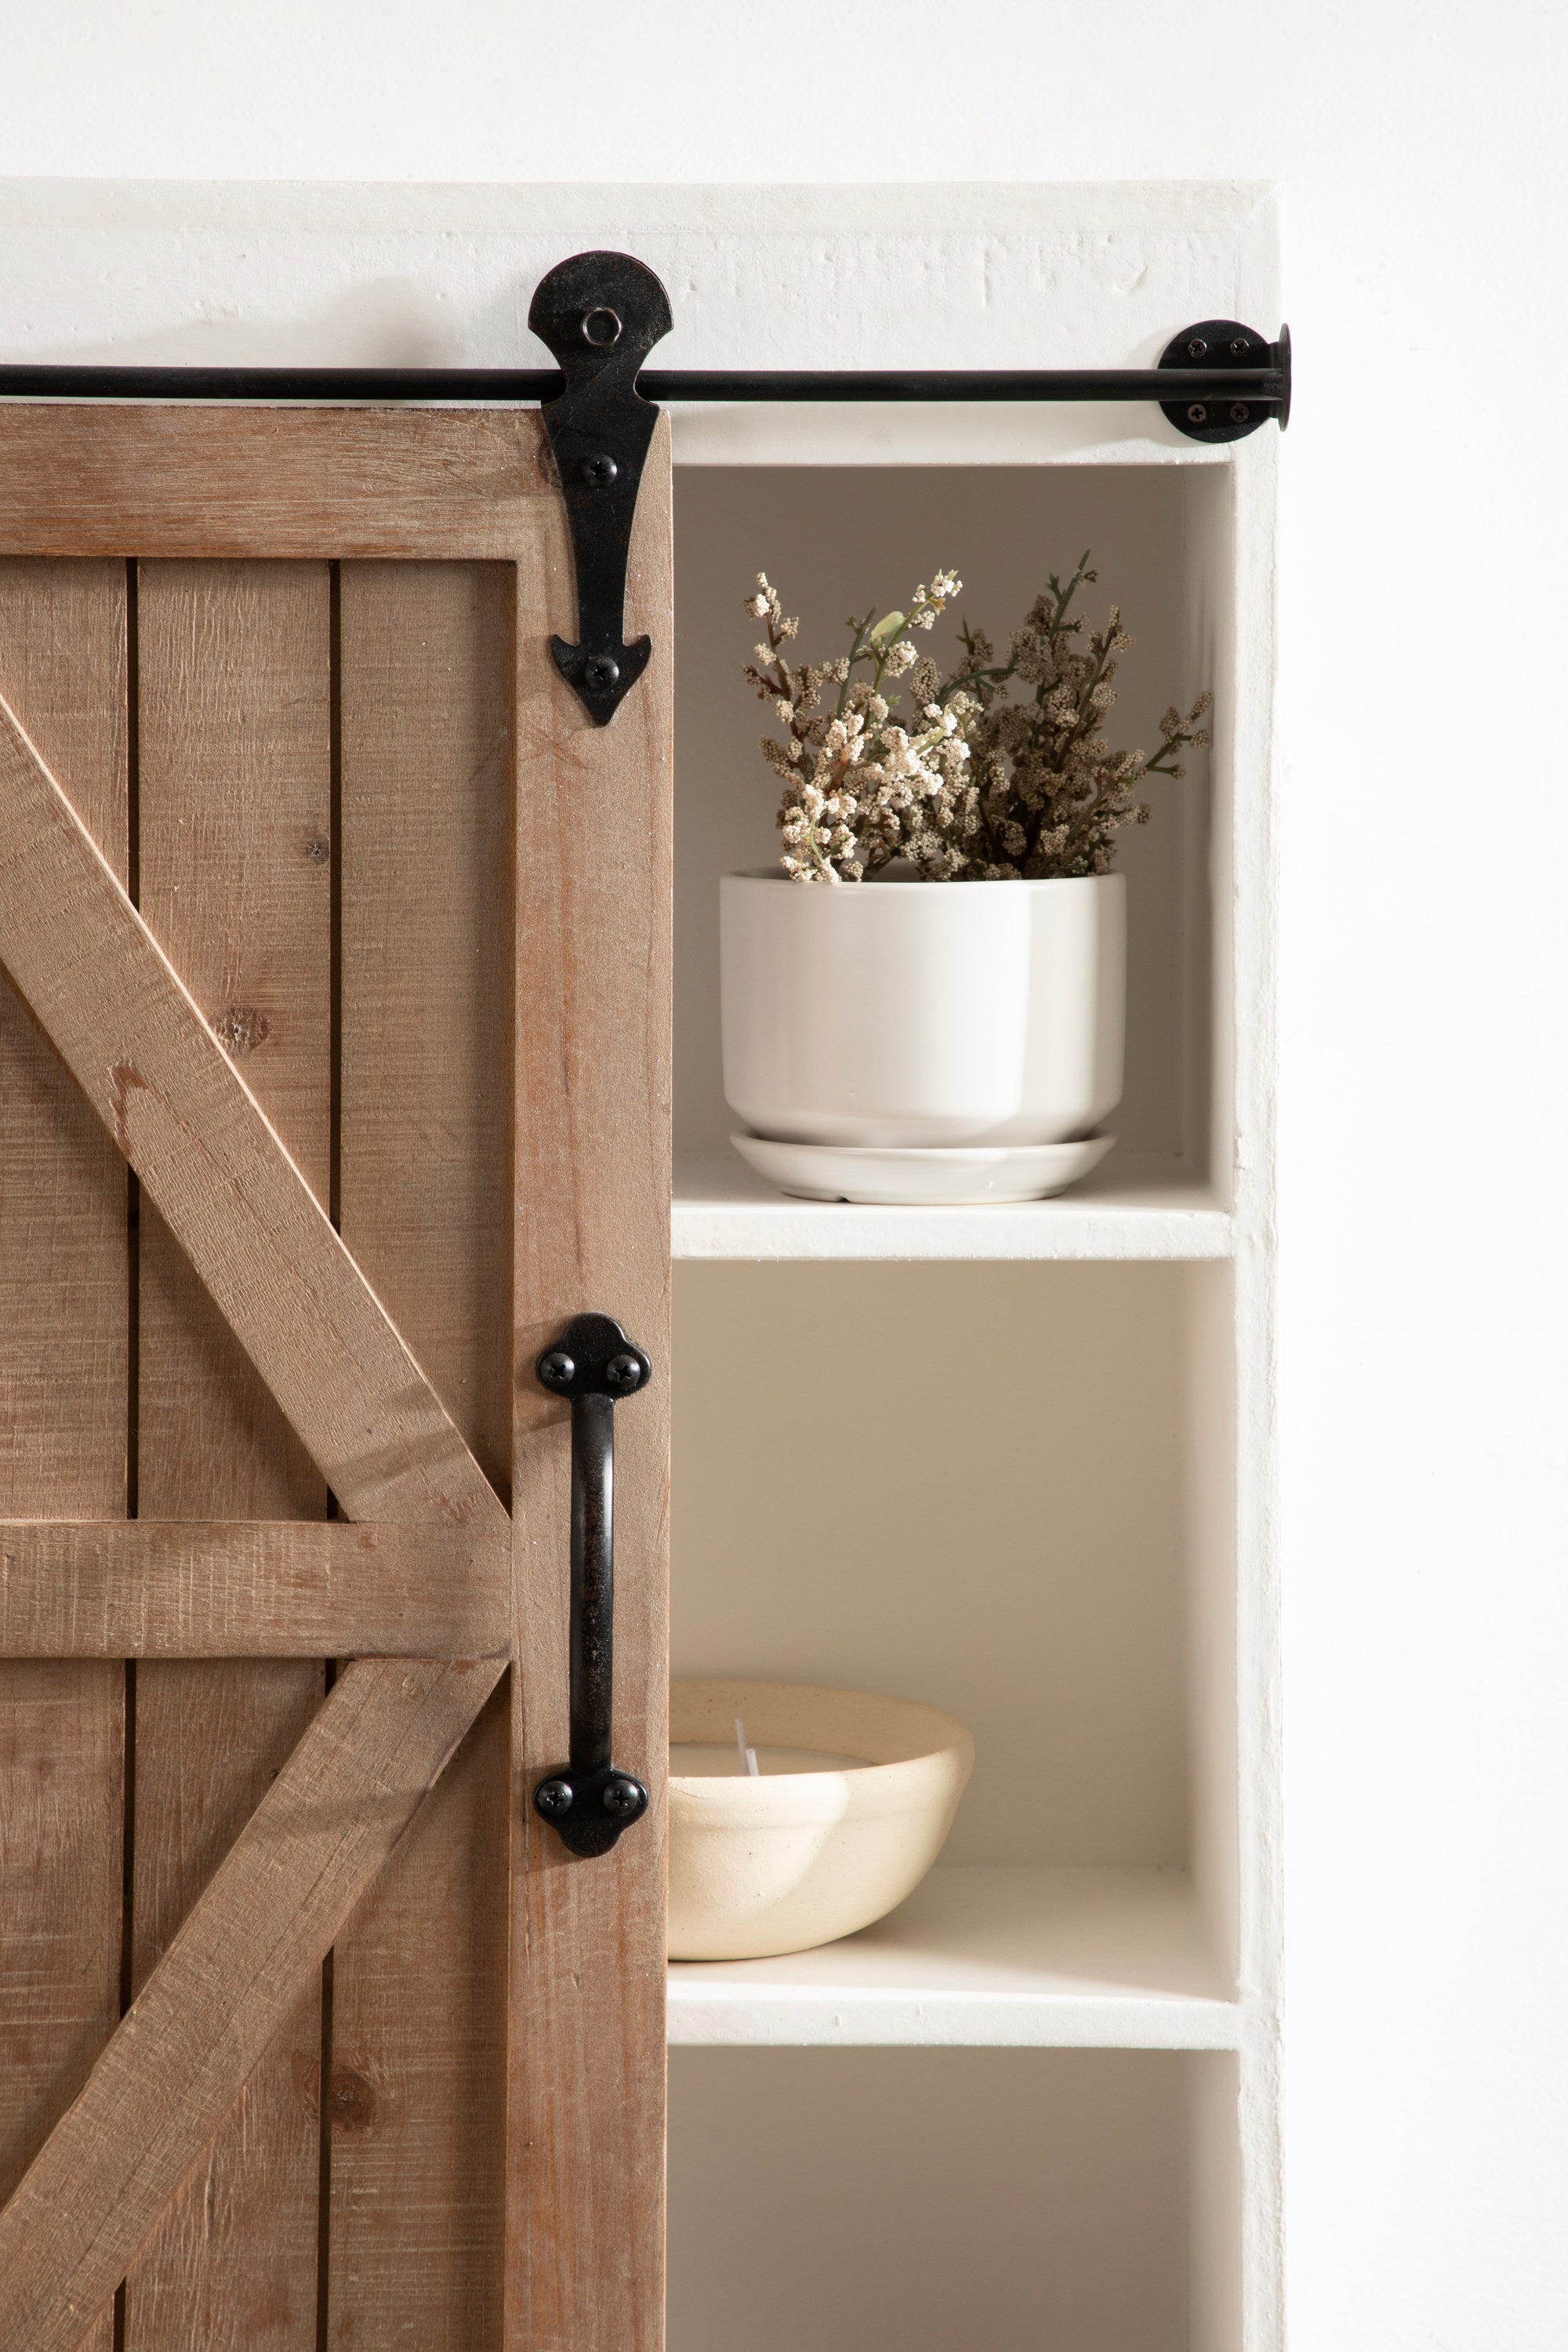 Cates Wood Wall Storage Cabinet with Sliding Barn Door